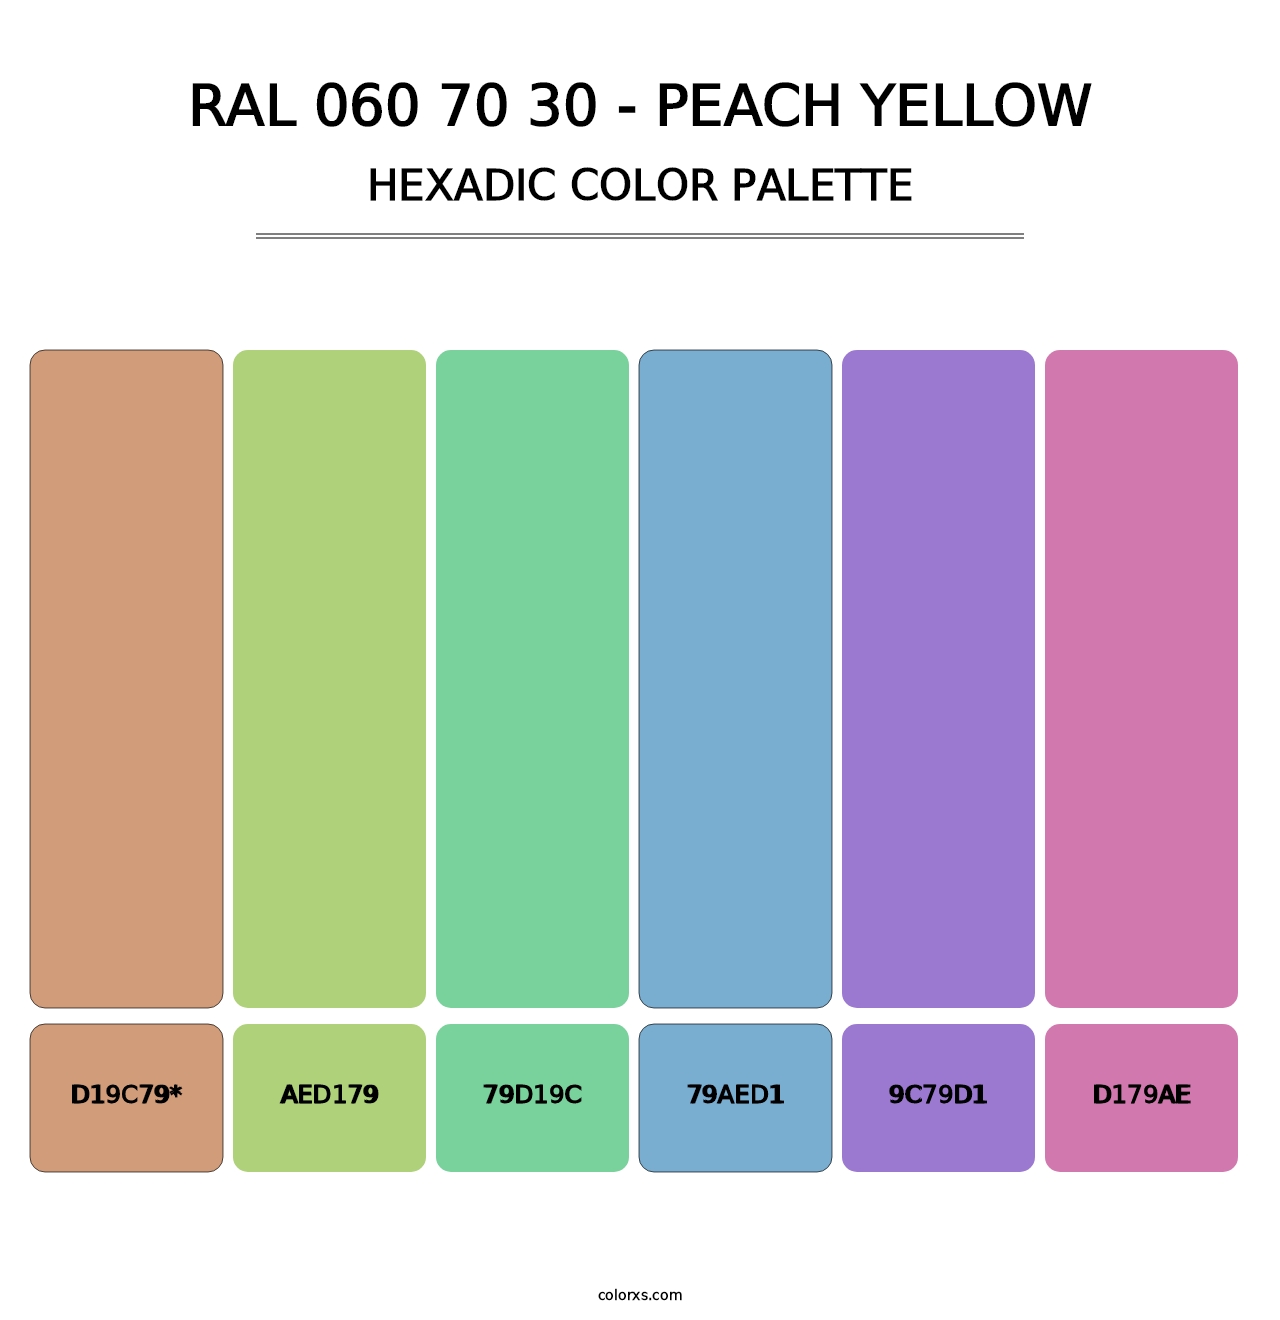 RAL 060 70 30 - Peach Yellow - Hexadic Color Palette